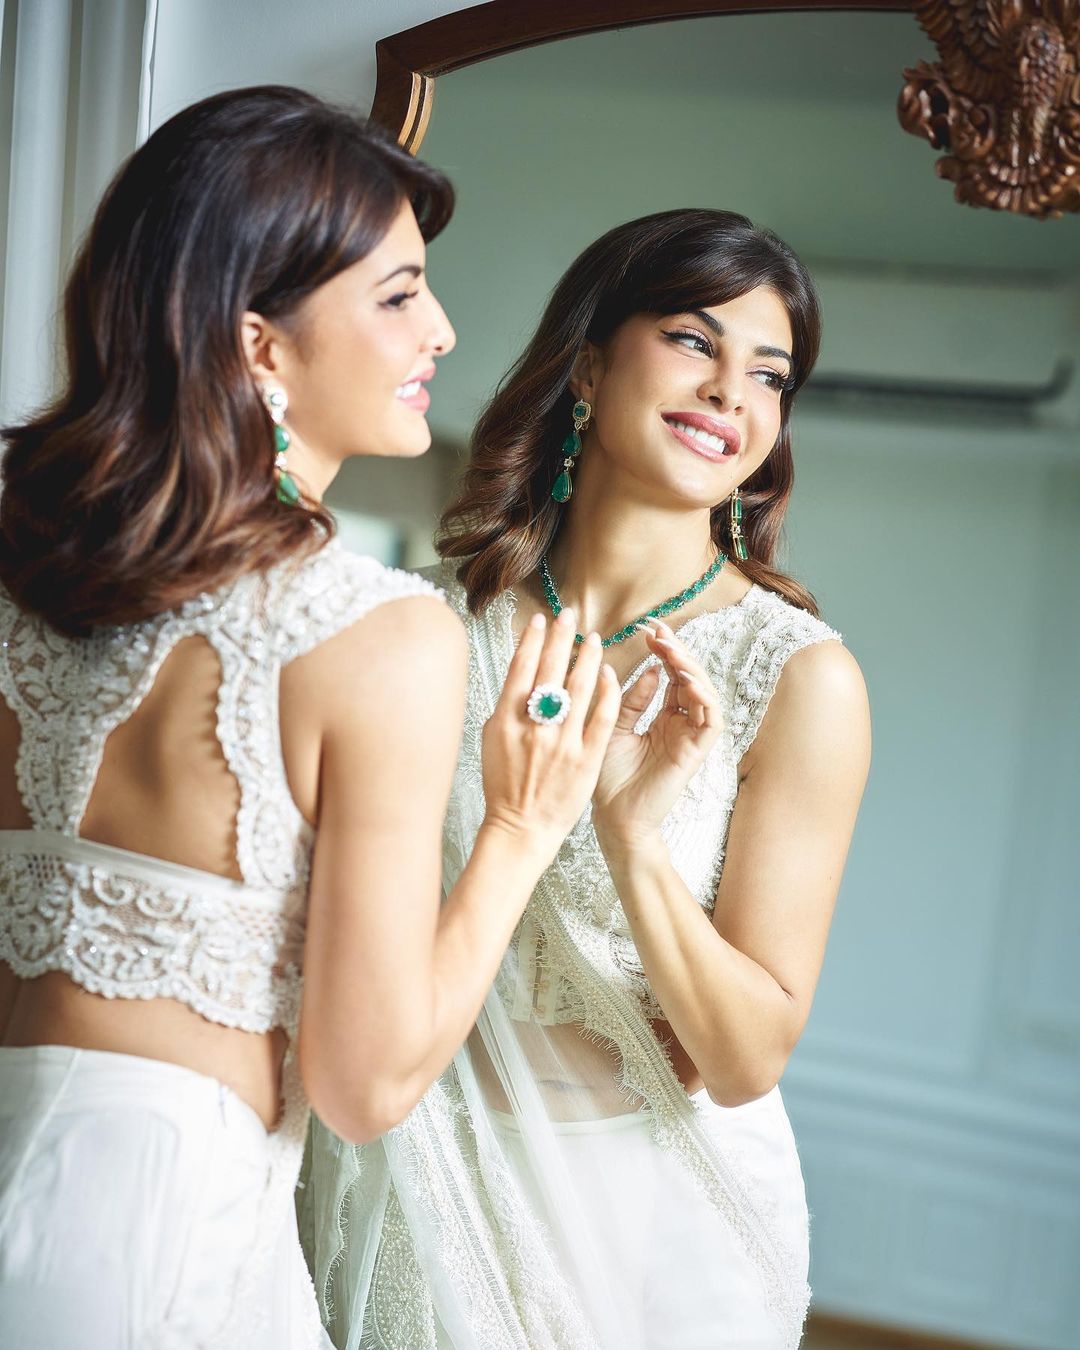 Jacqueline Fernandez pairs her saree with a lace blouse.